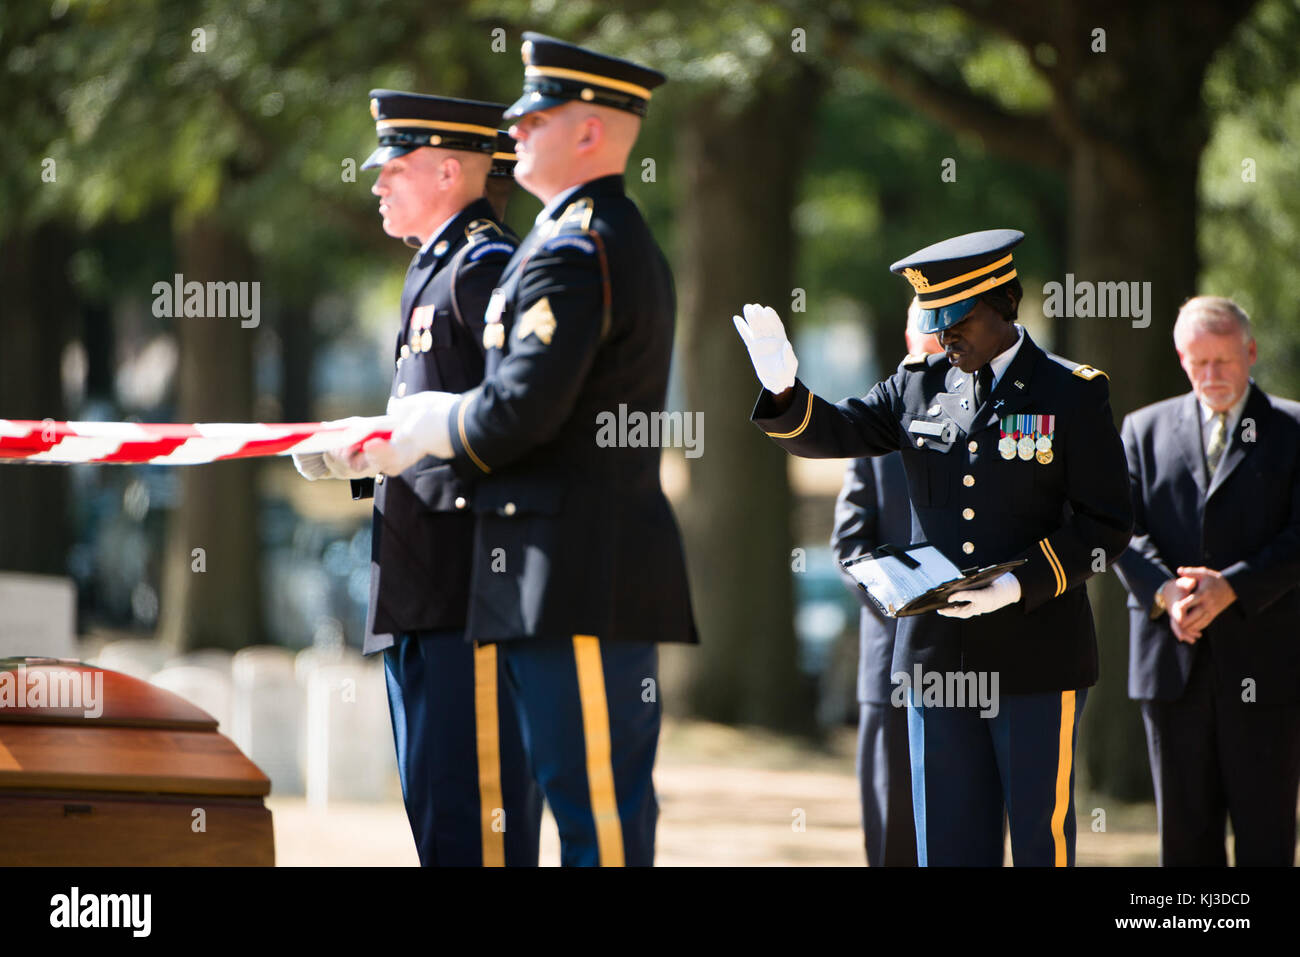 The graveside service for U.S. Army National Guard Staff Sgt. Thomas C. Florich in Section 60 of Arlington National Cemetery (21233730876) Stock Photo